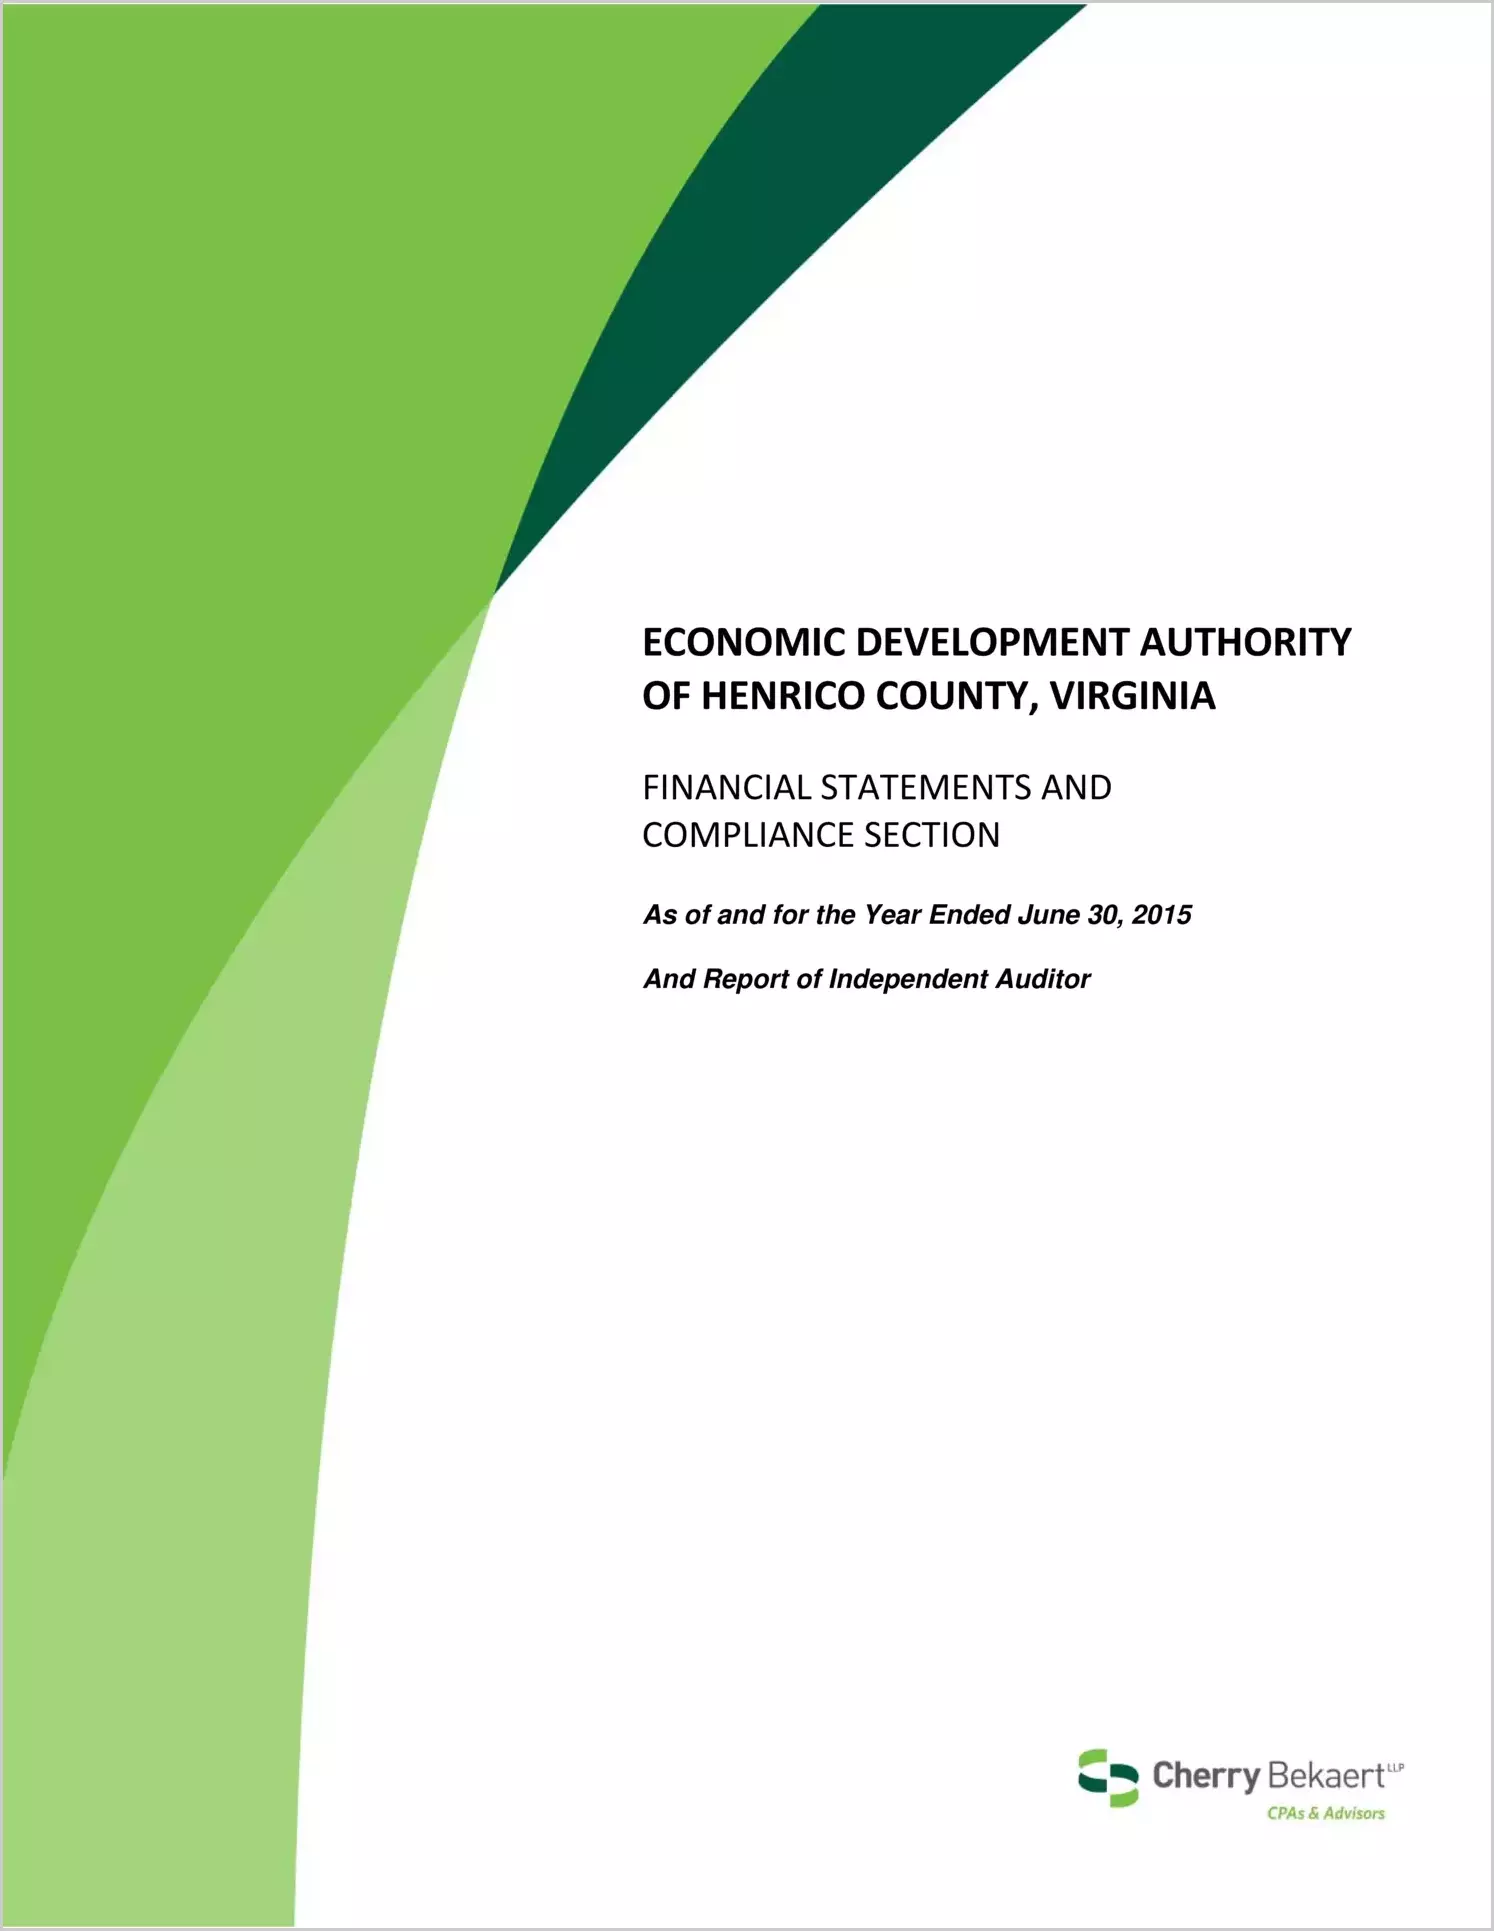 2015 ABC/Other Annual Financial Report  for Henrico Economic Development Authority